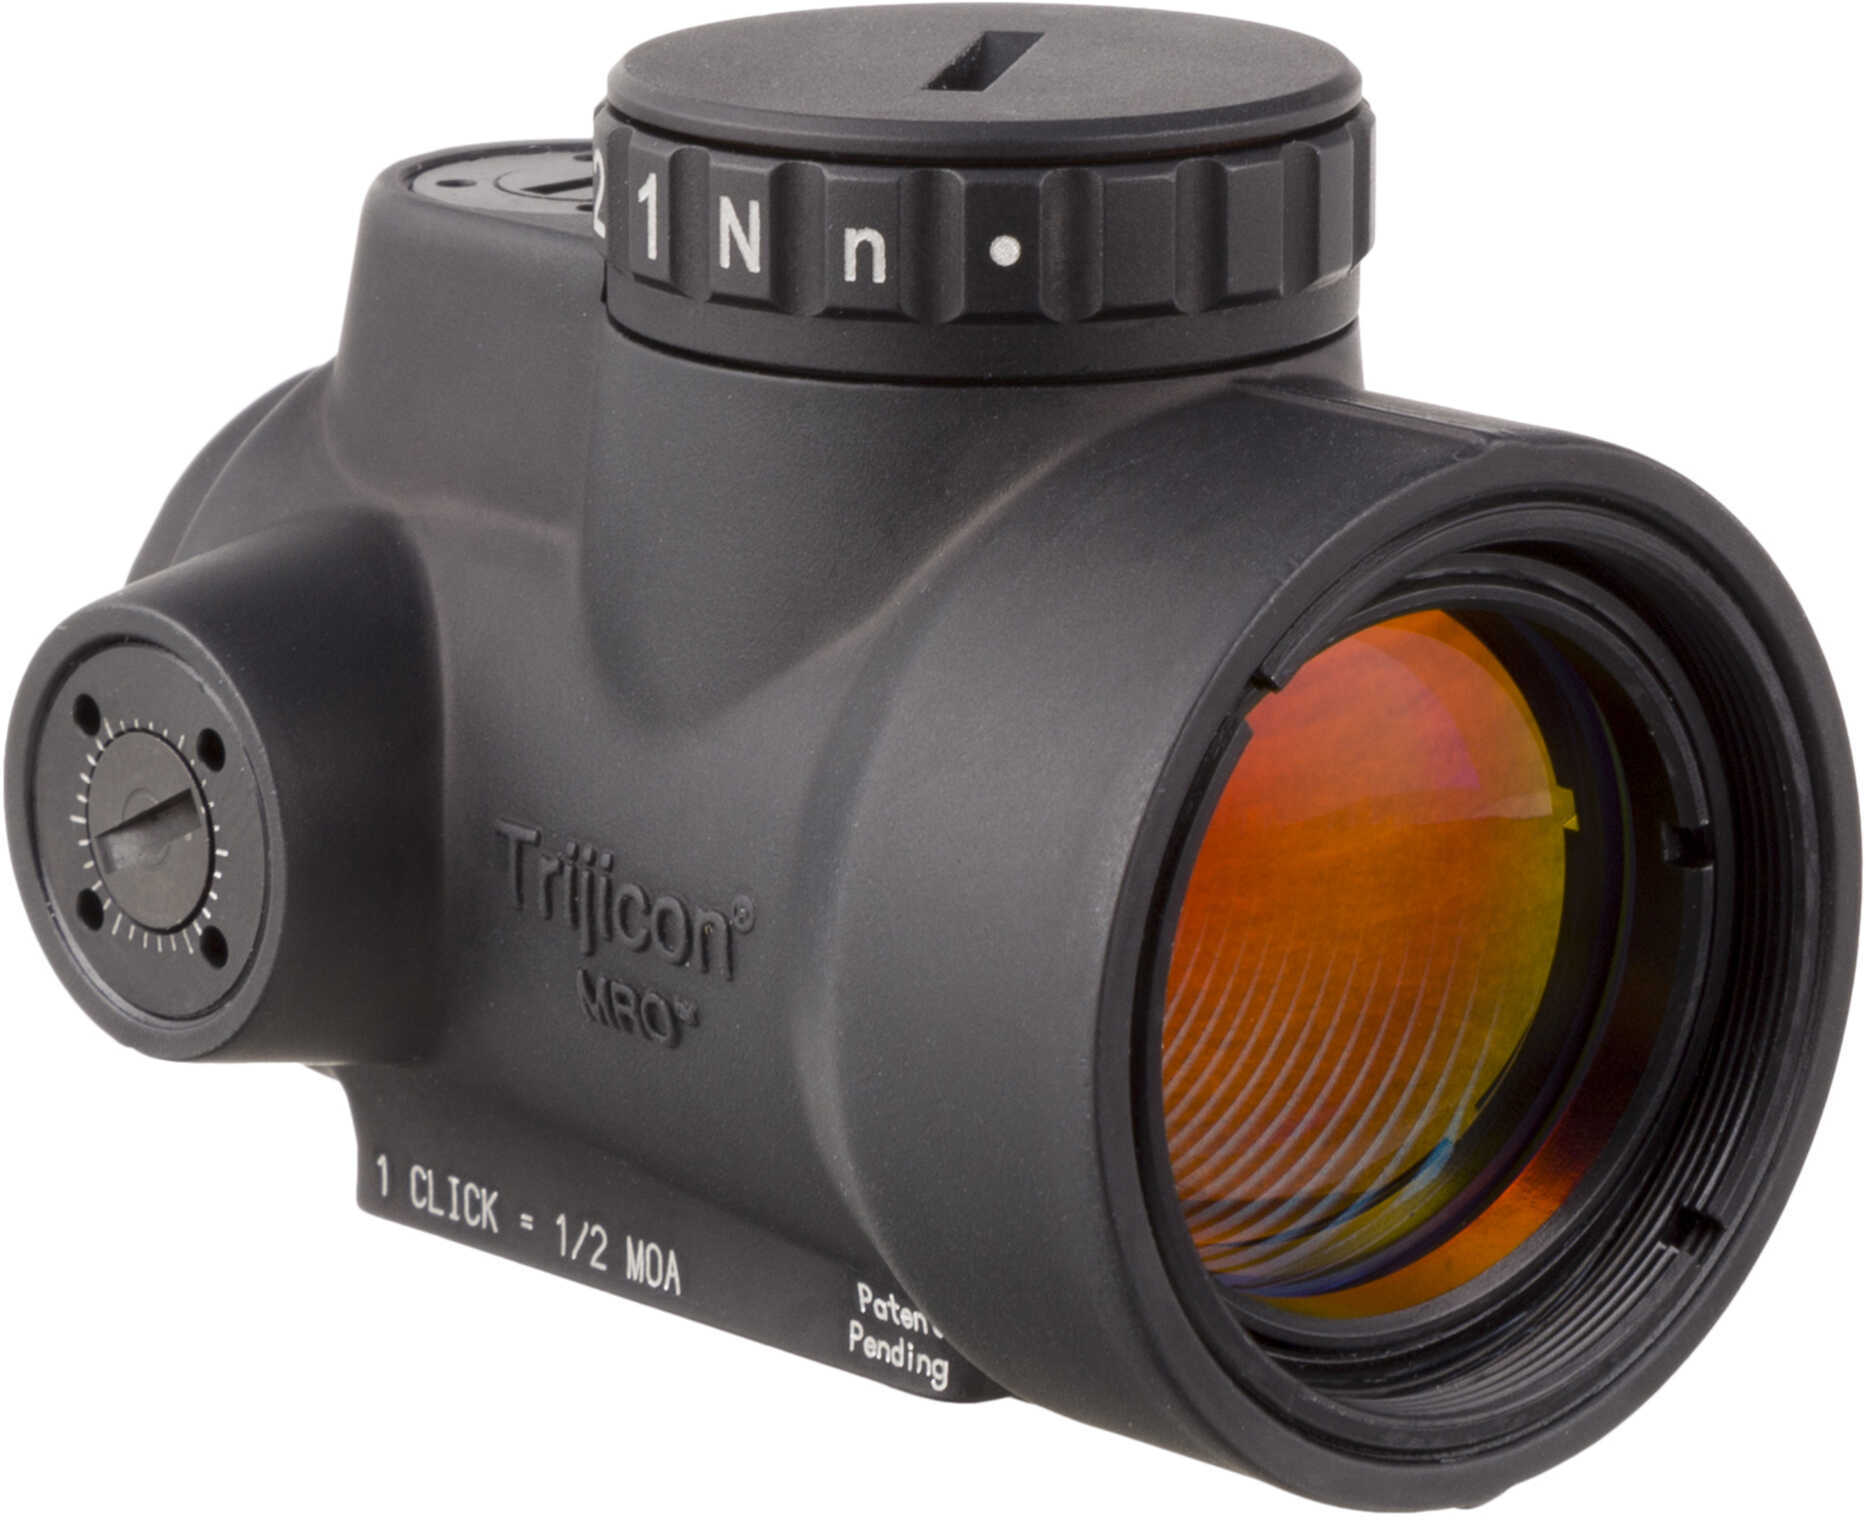 Trijicon MRO 2.0 MOA Adjustable Red Dot Sight 1x25mm without Mount Md: 2200003